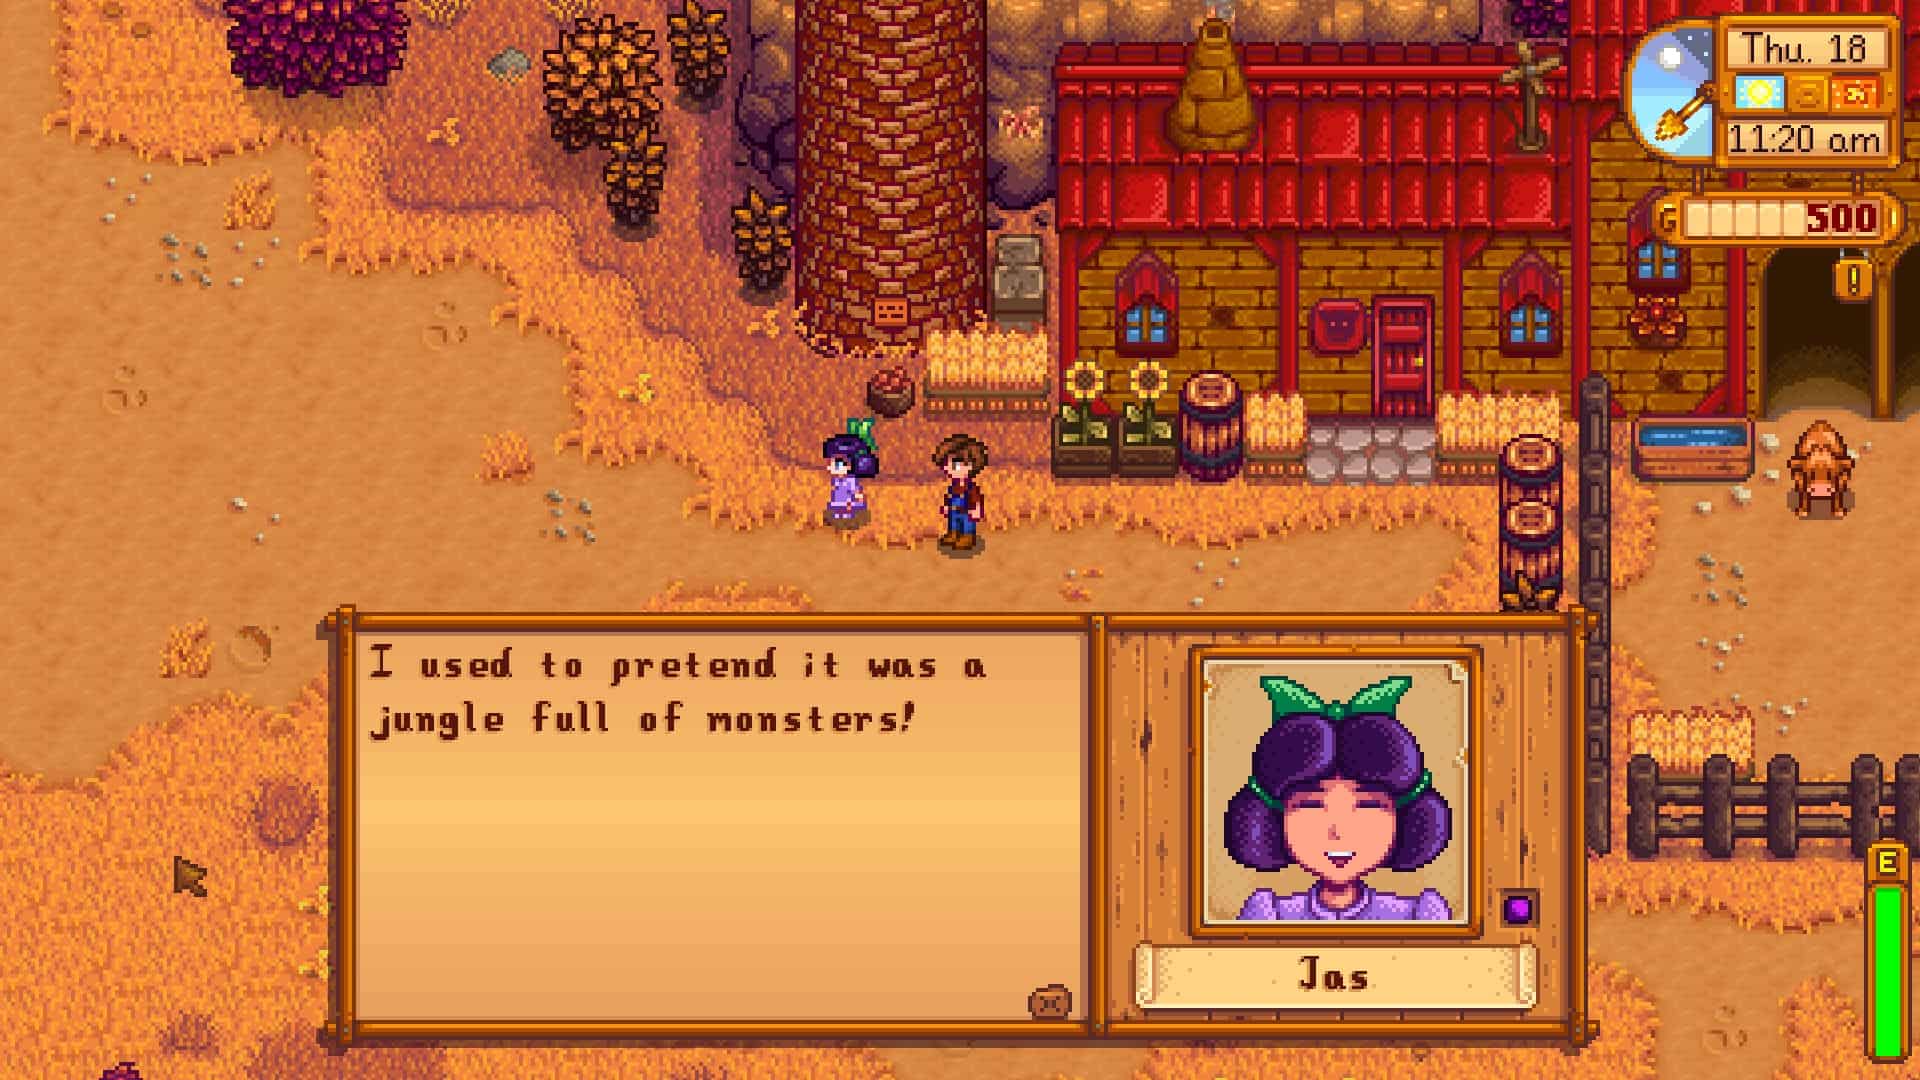 More Personality for Jas Mod Stardew Valley Mod Download Free.